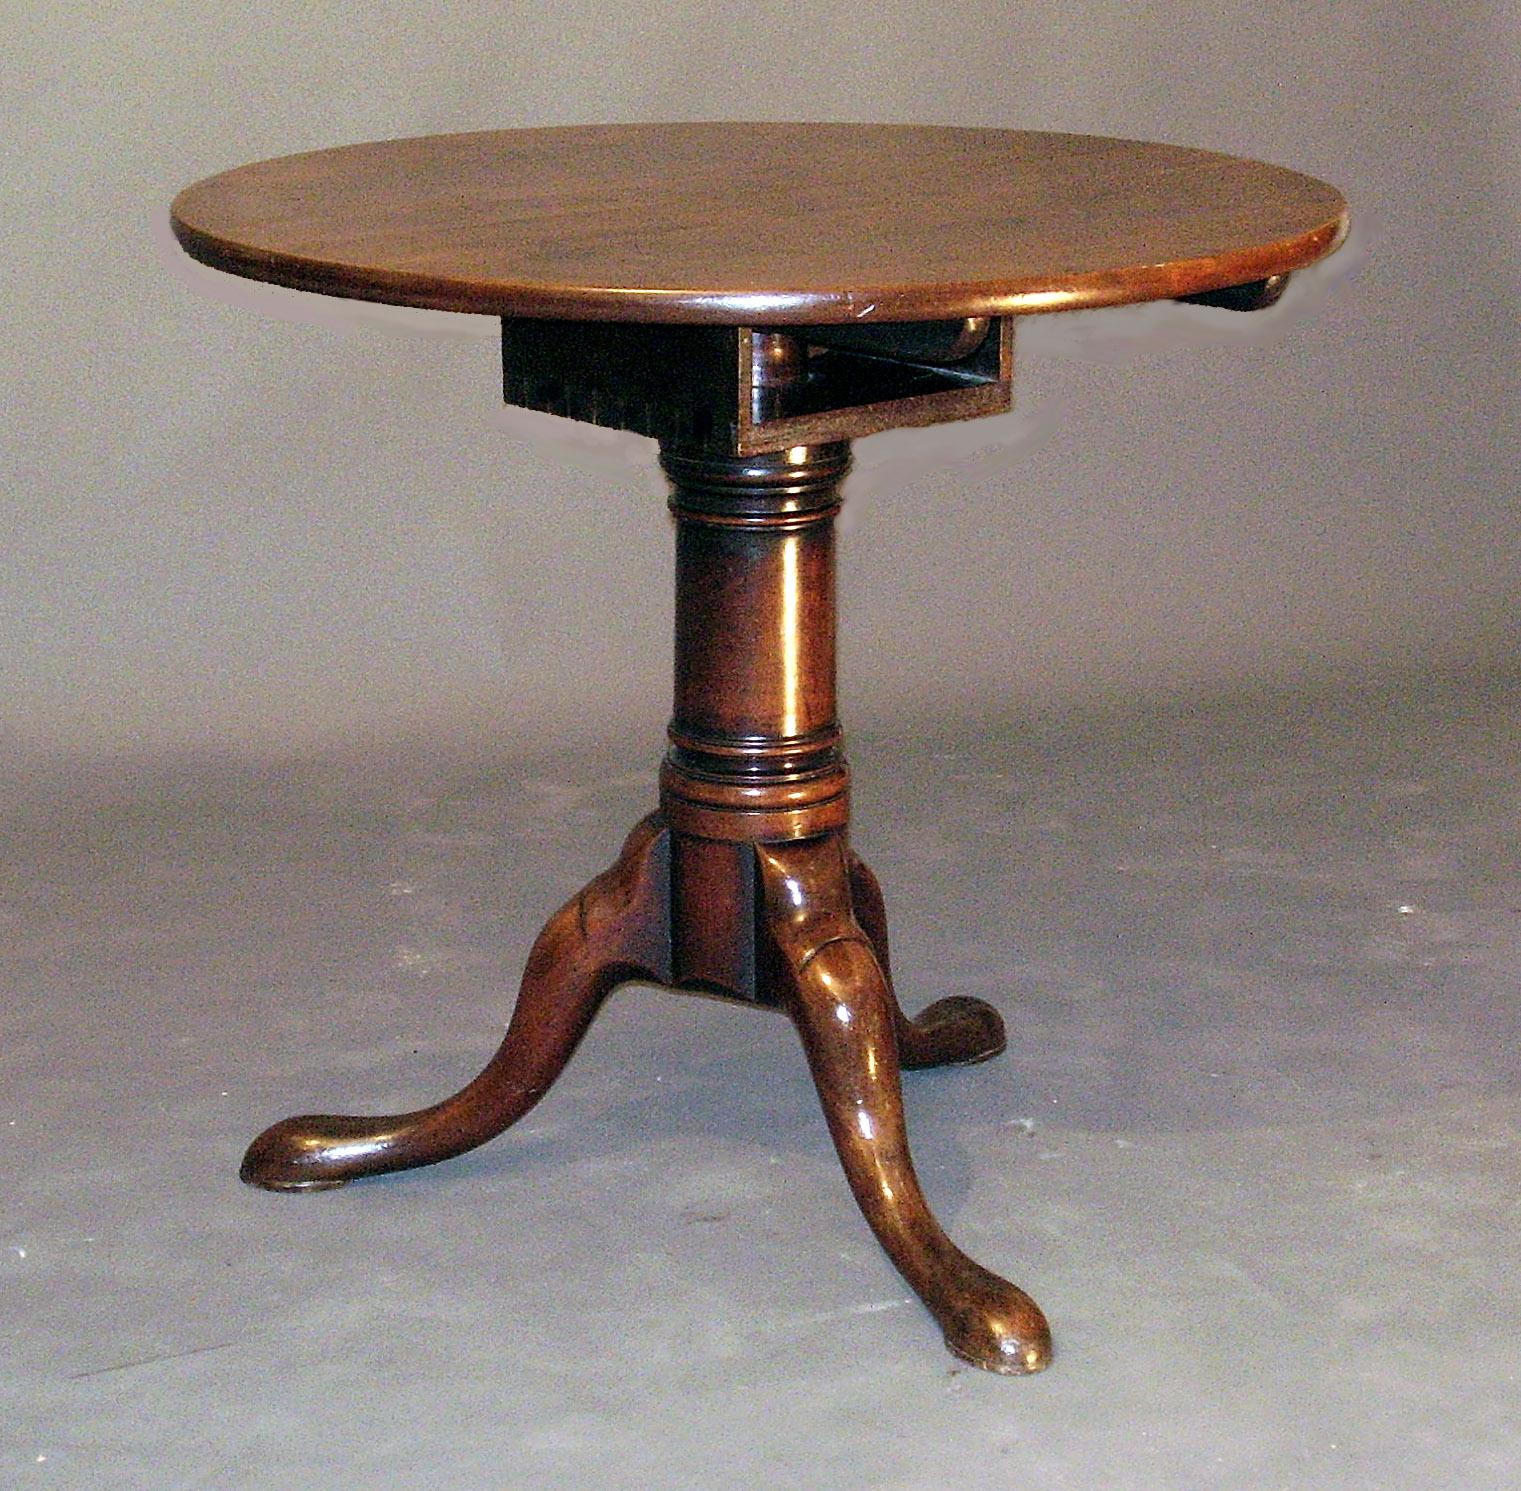 A George II tripod table with revolving one-piece top and a sturdy 'gun barrel' tripod stem, perhaps made to support a heavy bronze, mahogany of a good soft colour.